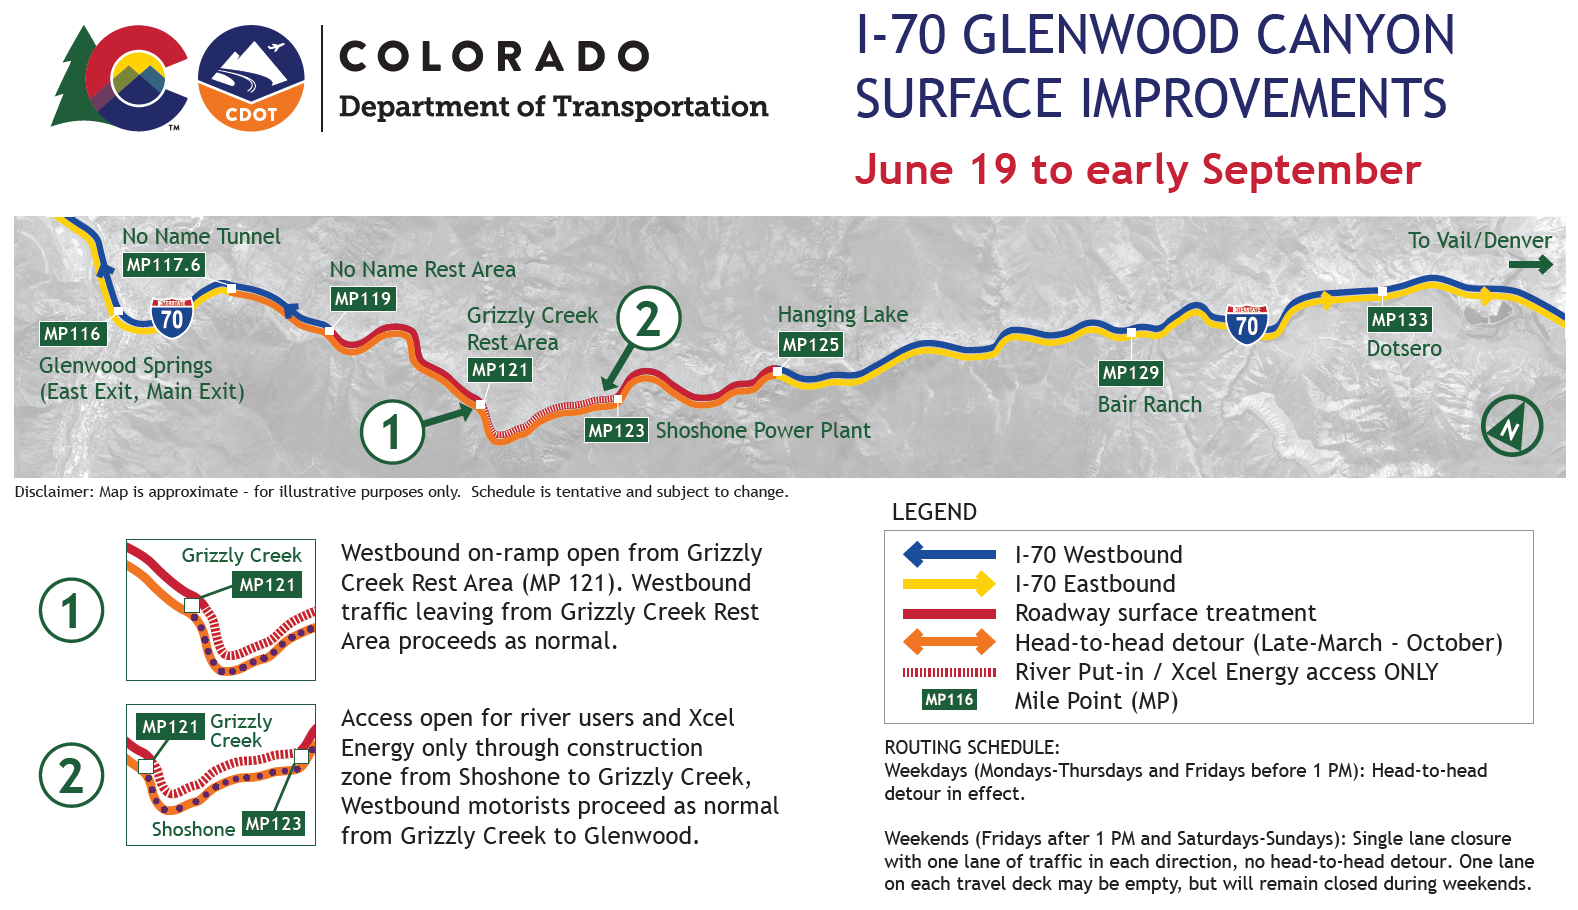 I-70 Glenwood Canyon surface improvements project area map from June 19 to early September detail image